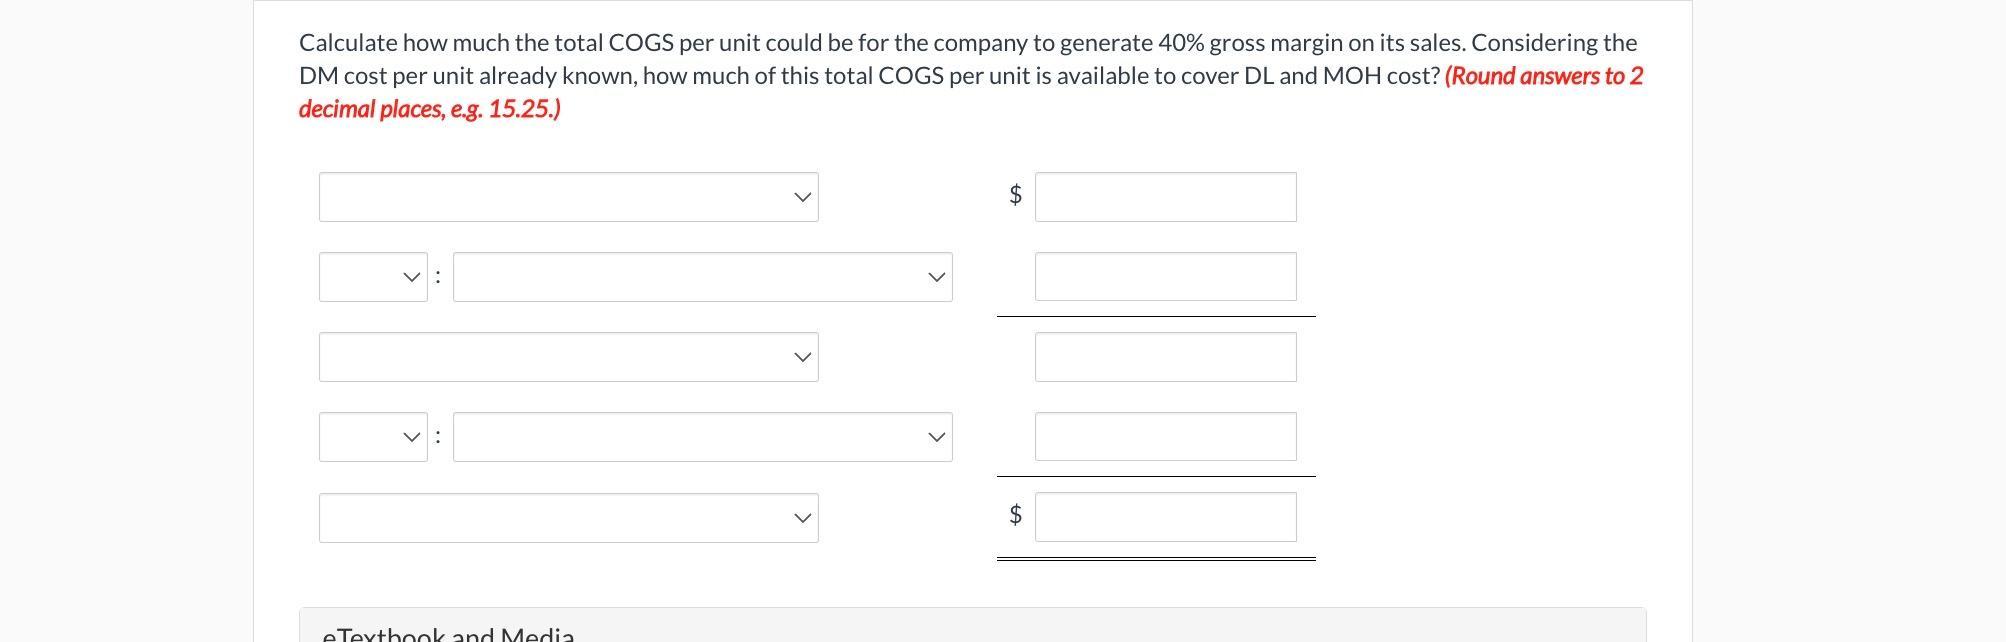 Calculate how much the total COGS per unit could be for the company to generate ( 40 % ) gross margin on its sales. Consid